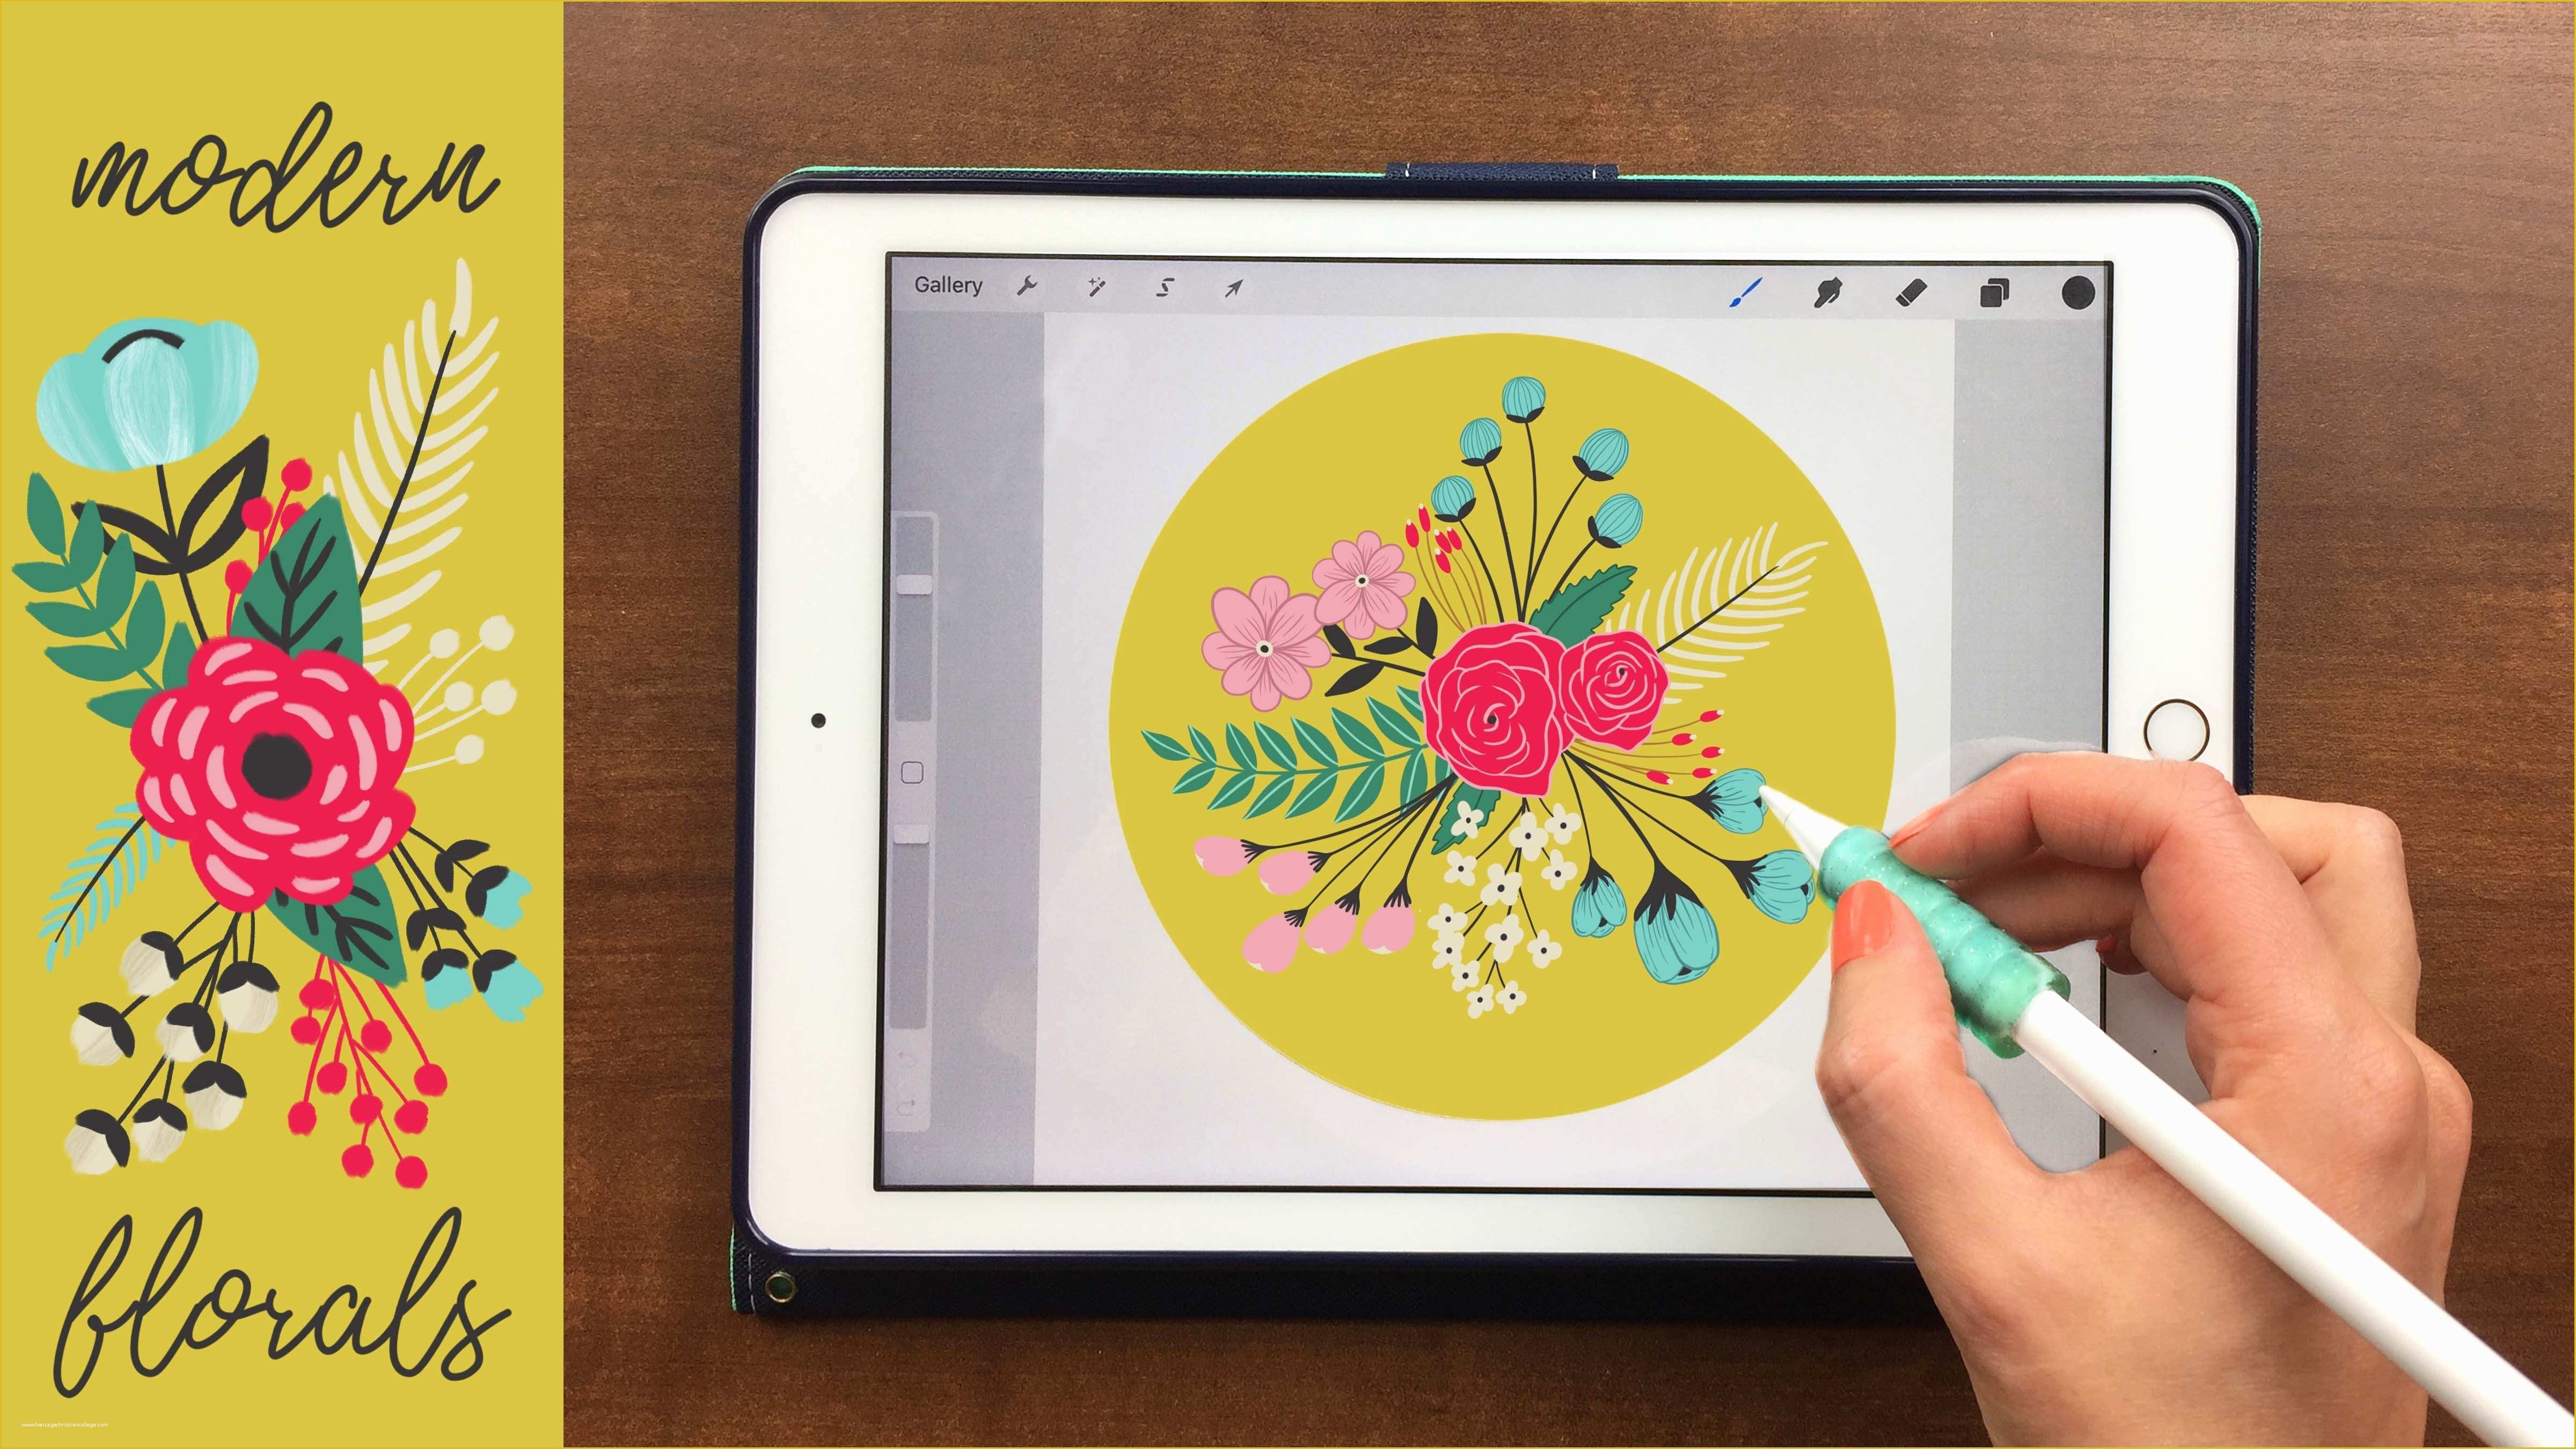 Free Procreate Templates Of Modern Florals On Your Ipad In Procreate 22 Free Stamps